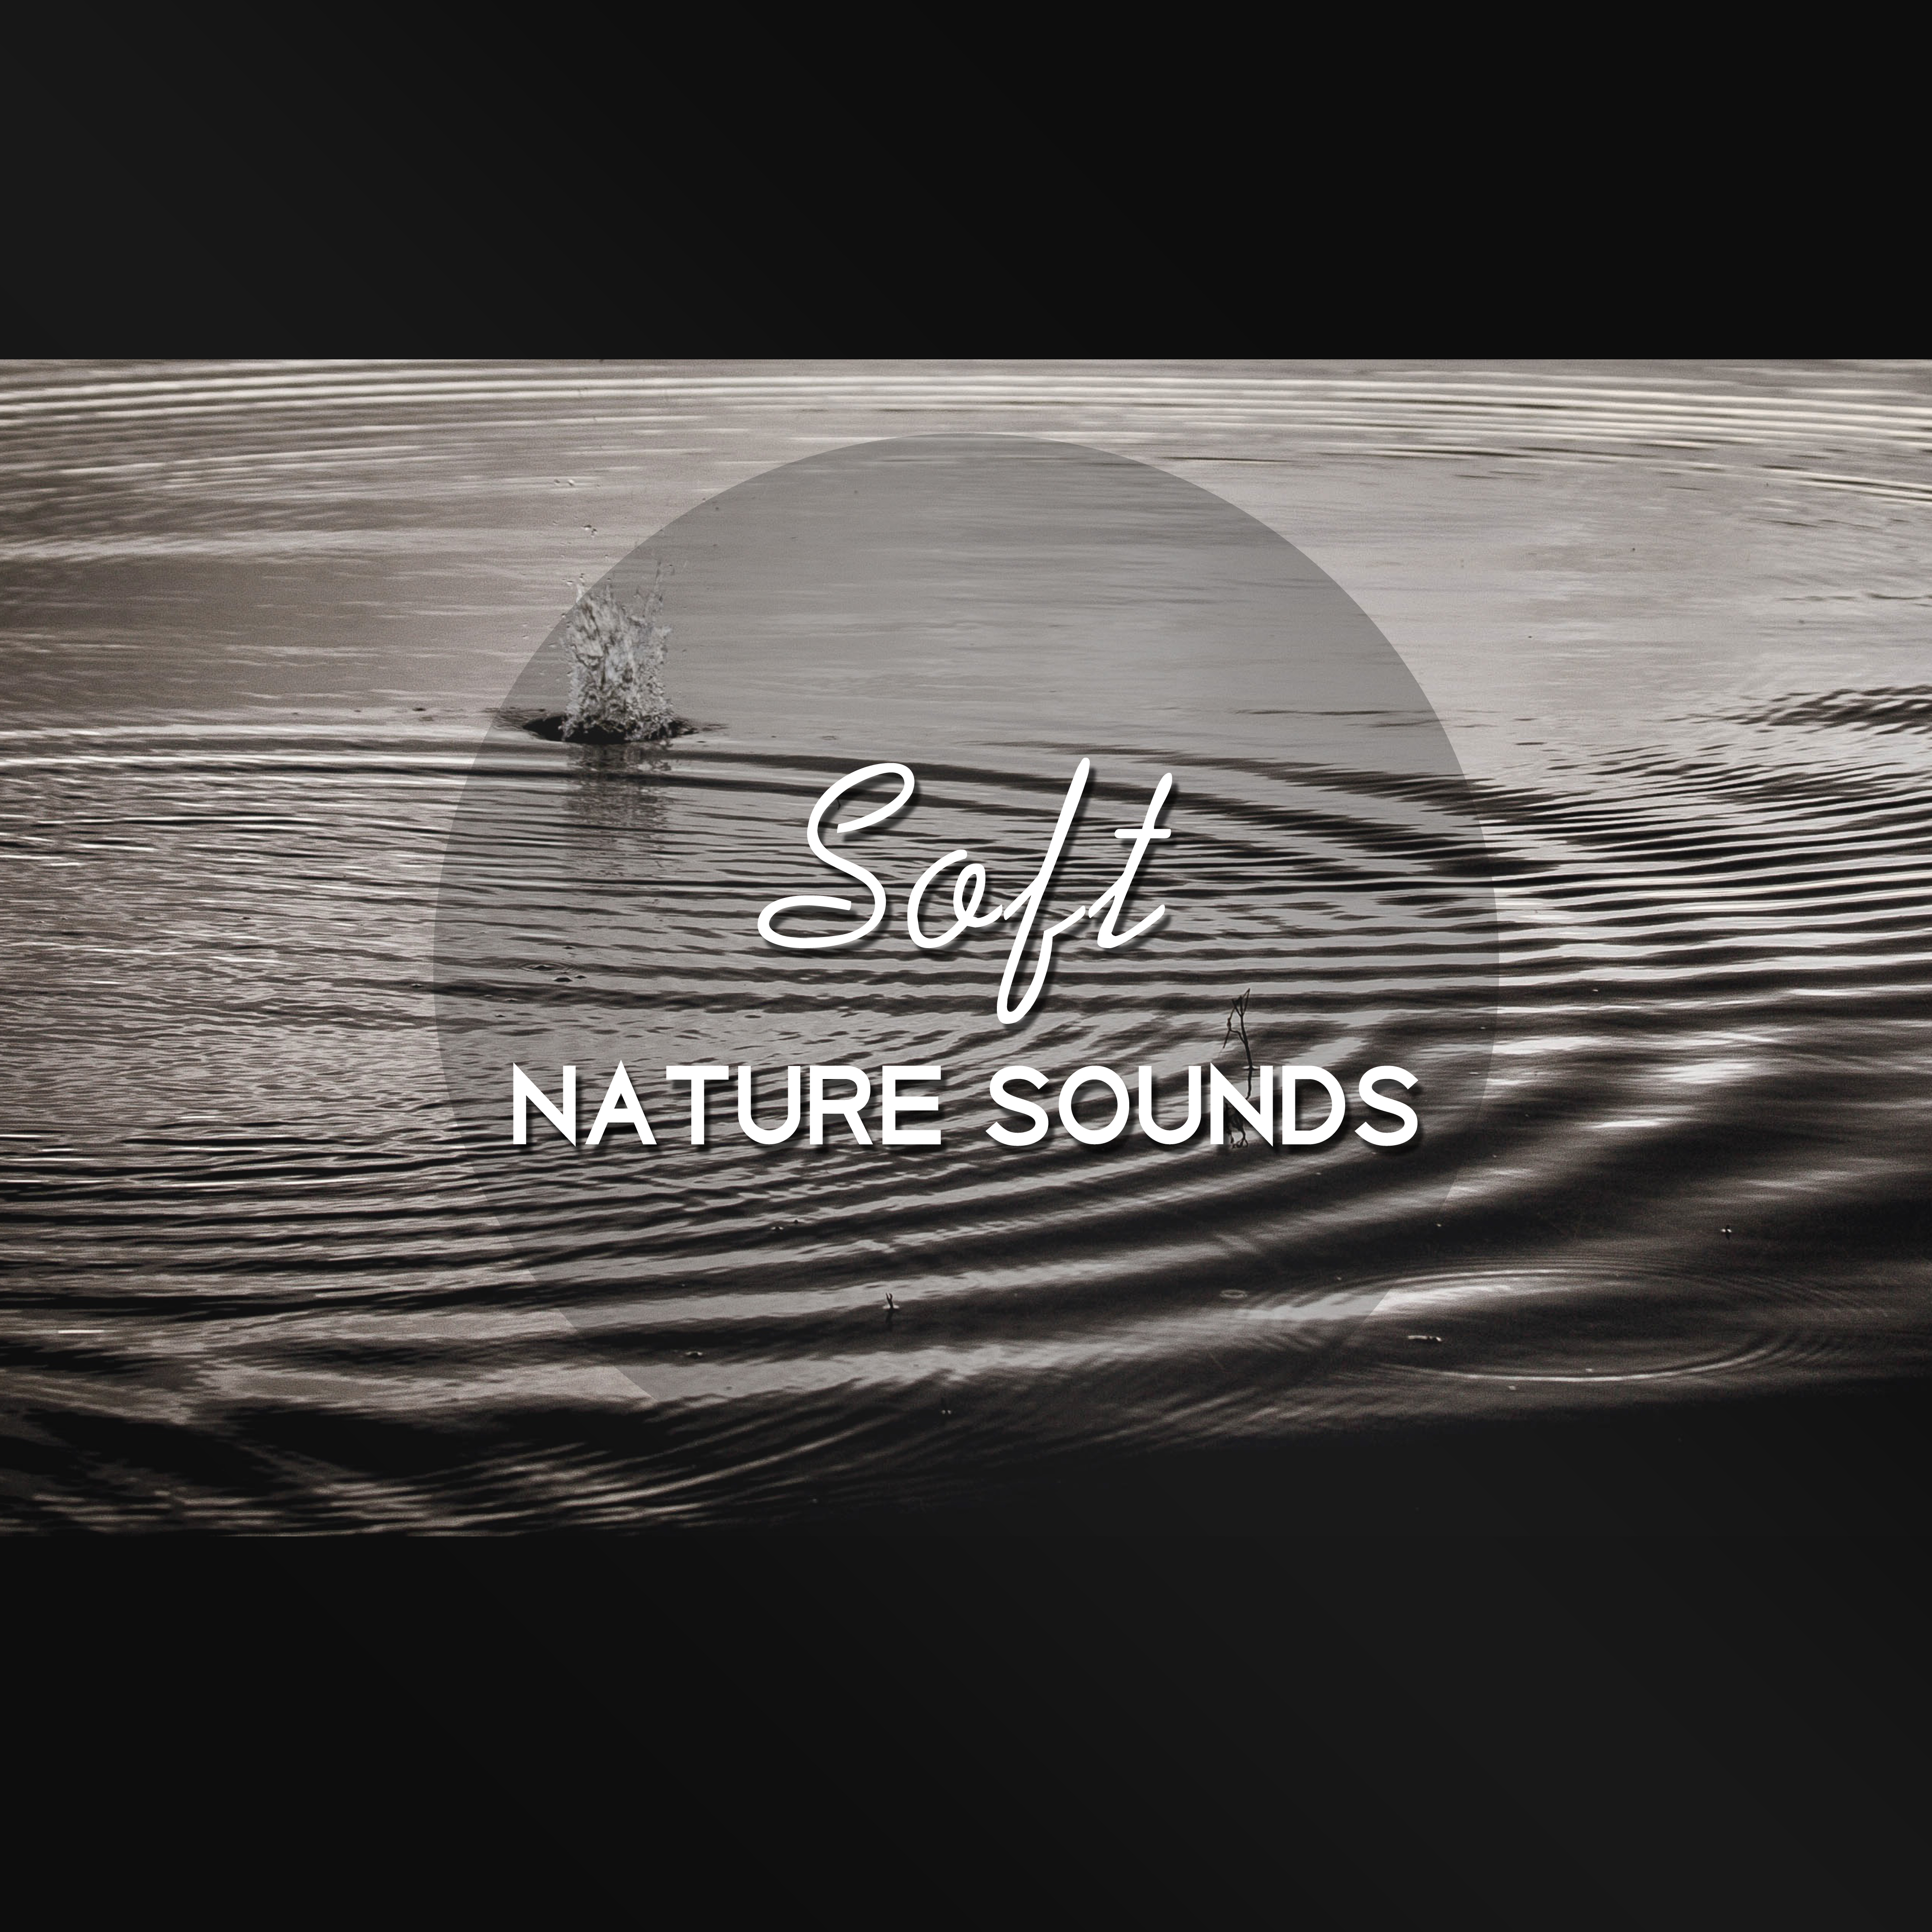 Soft Nature Sounds  Pure Relaxation, Zen Music, Sea Sounds, Harmony, Peaceful Mind, Stress Free, Calm Down, Positive Energy